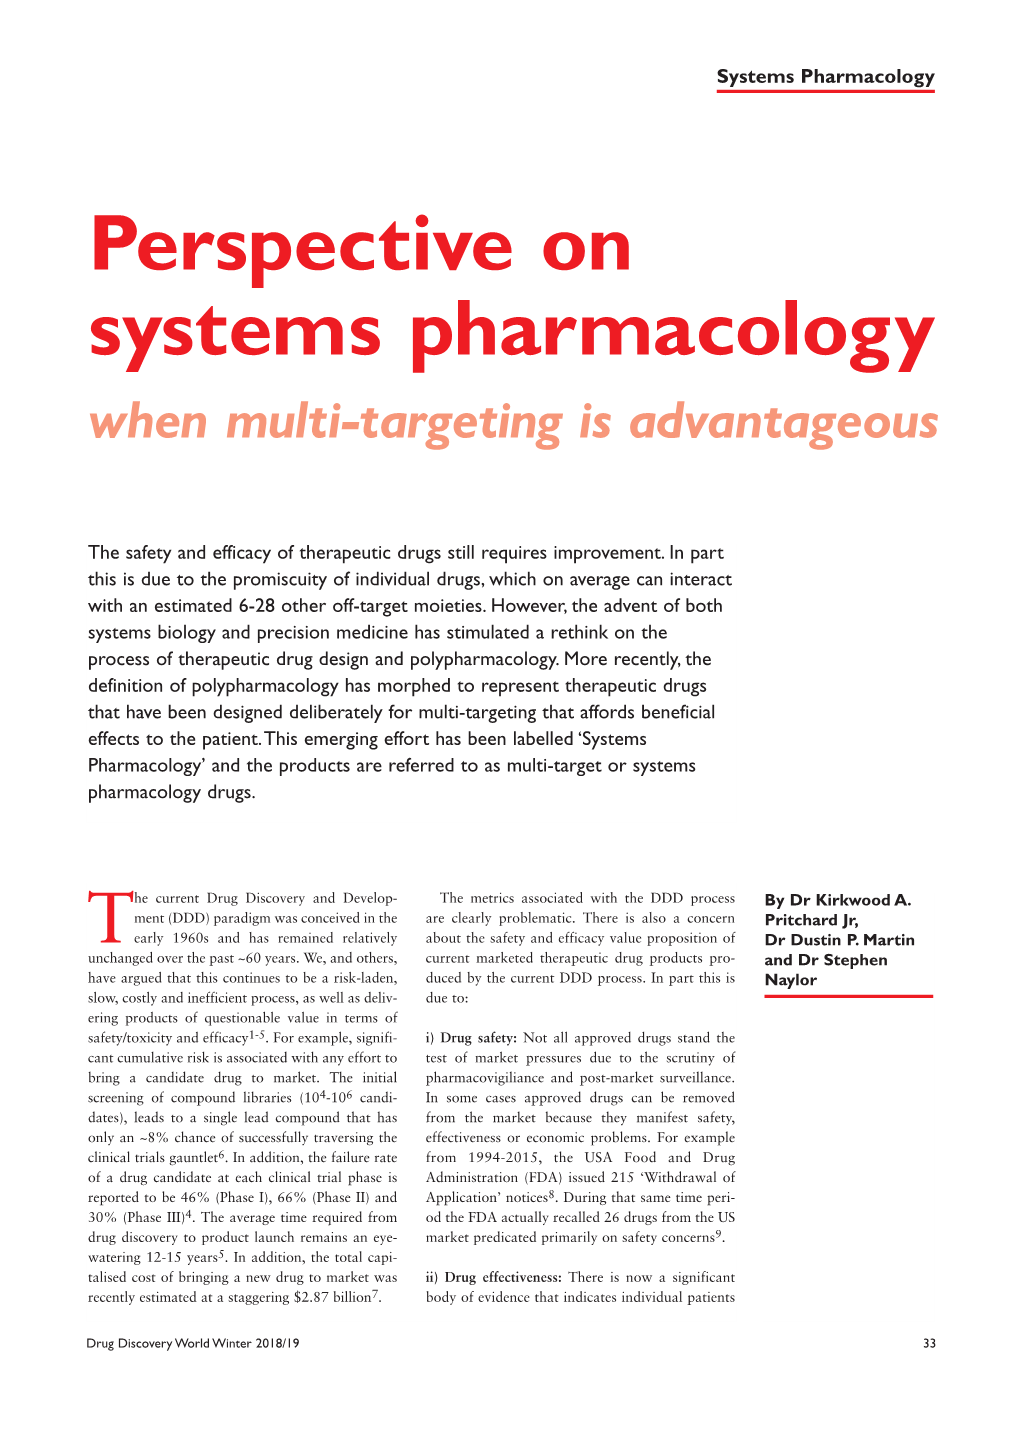 Perspective on Systems Pharmacology